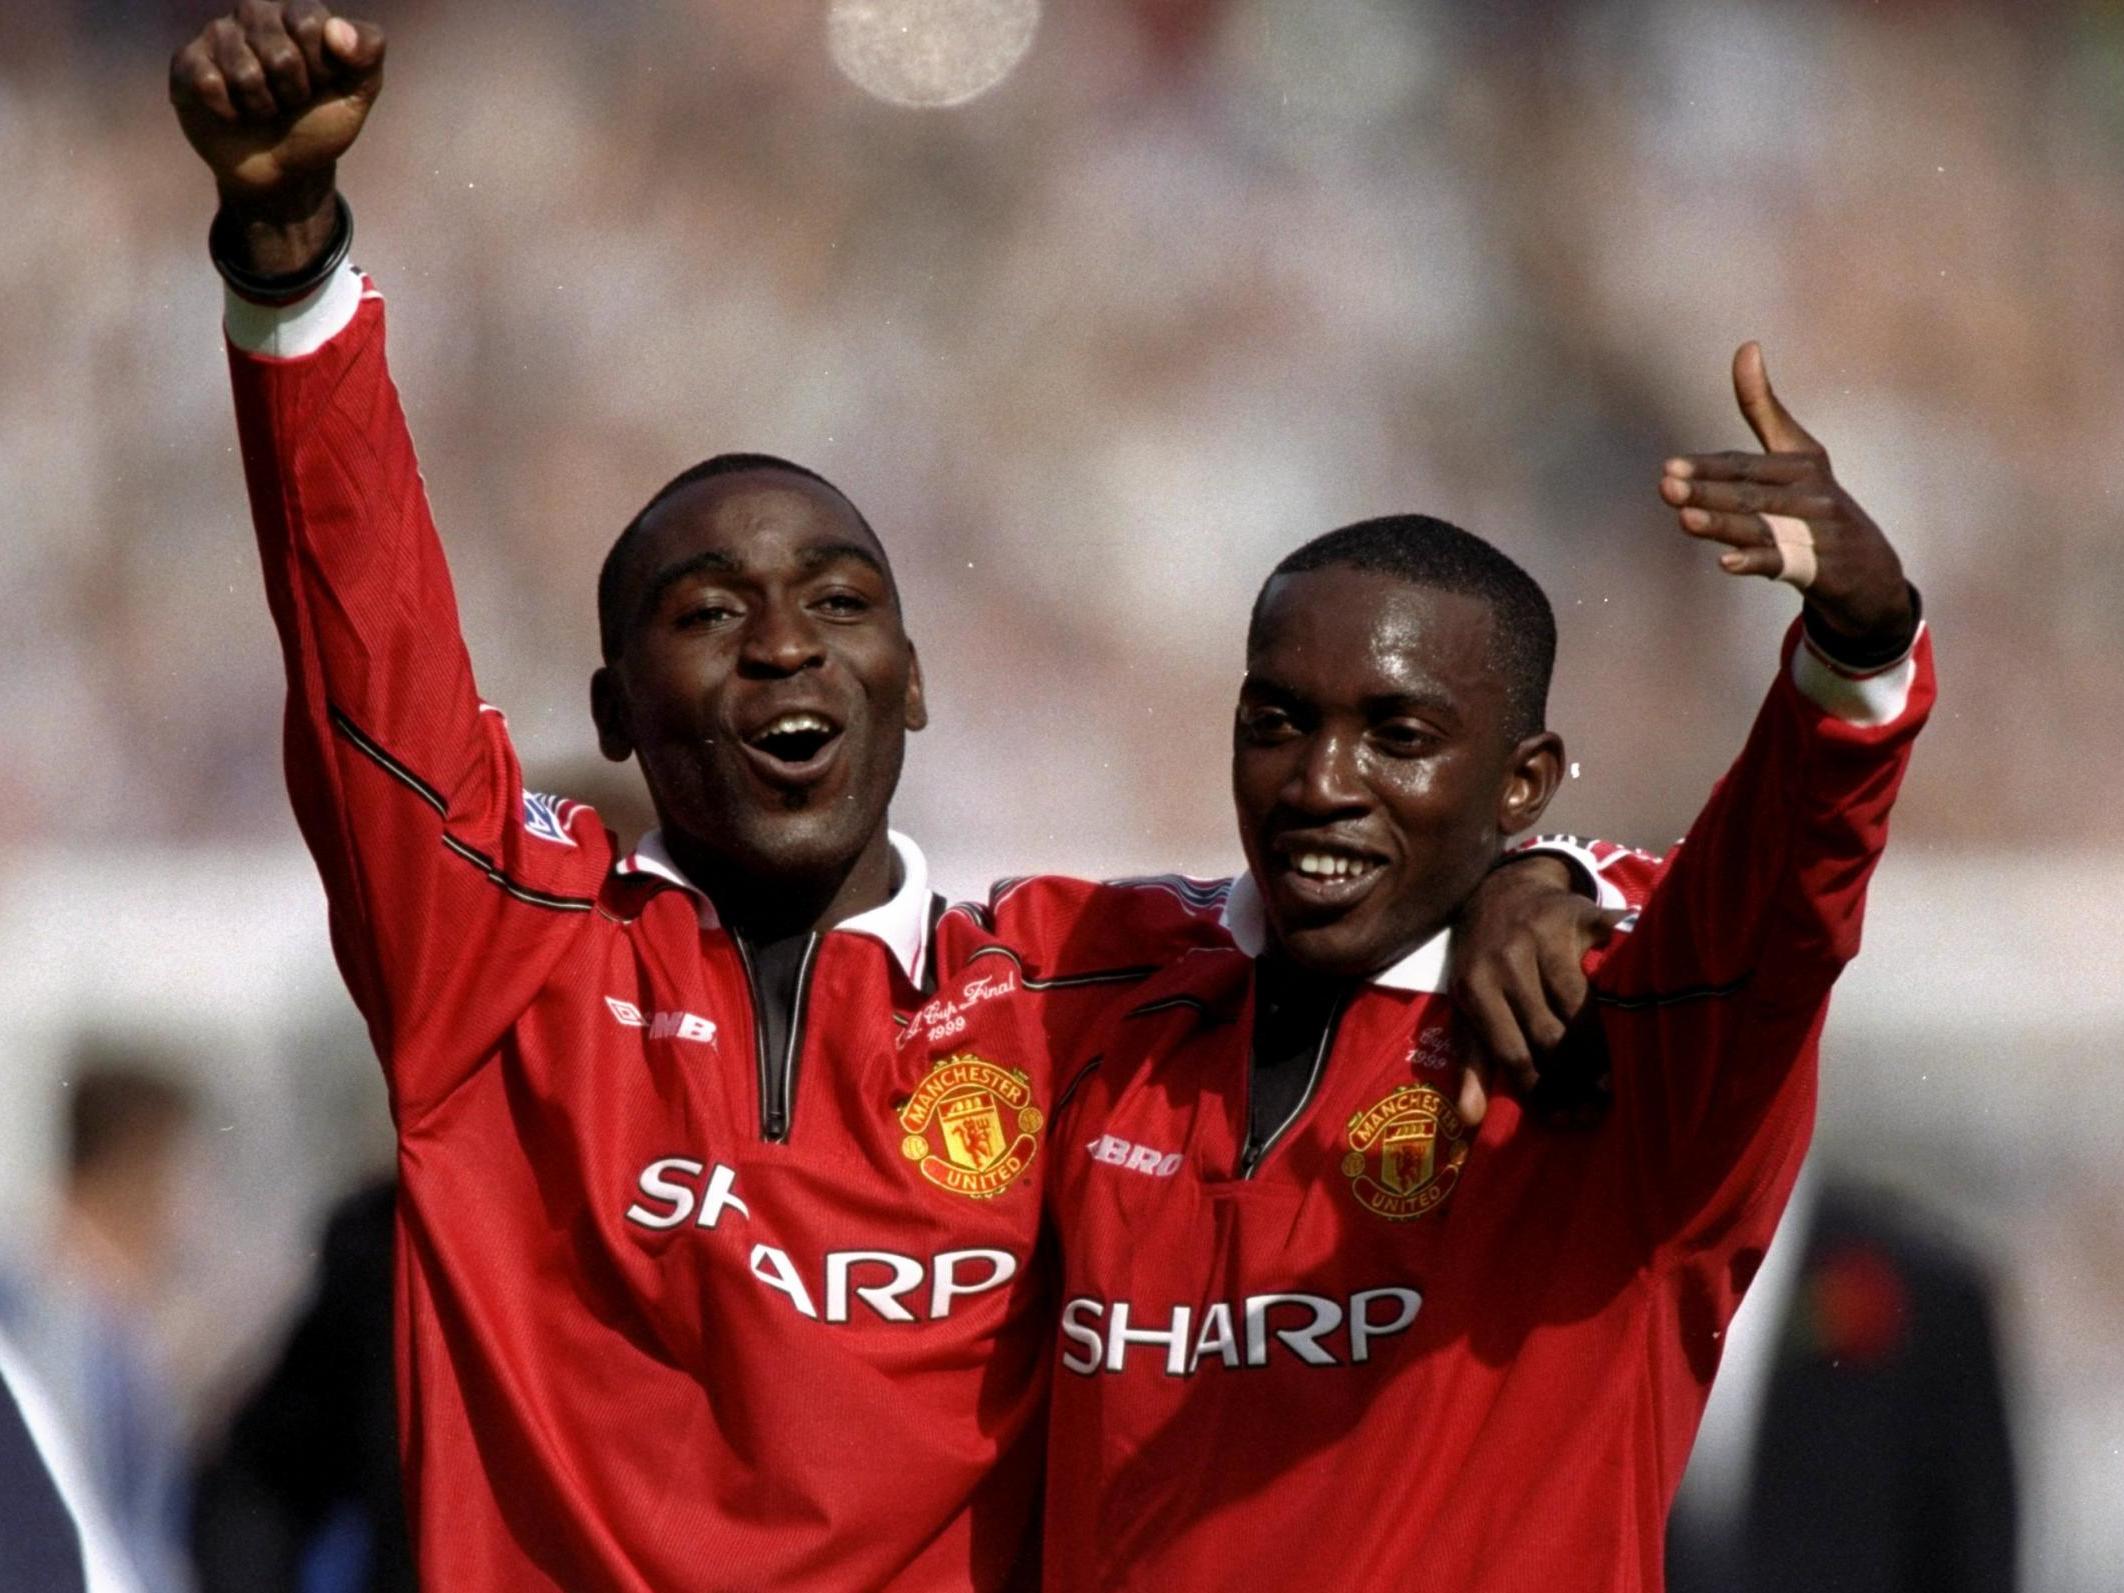  Dwight Yorke and Andy Cole celebrating a goal for Manchester United during the 1998-99 season.